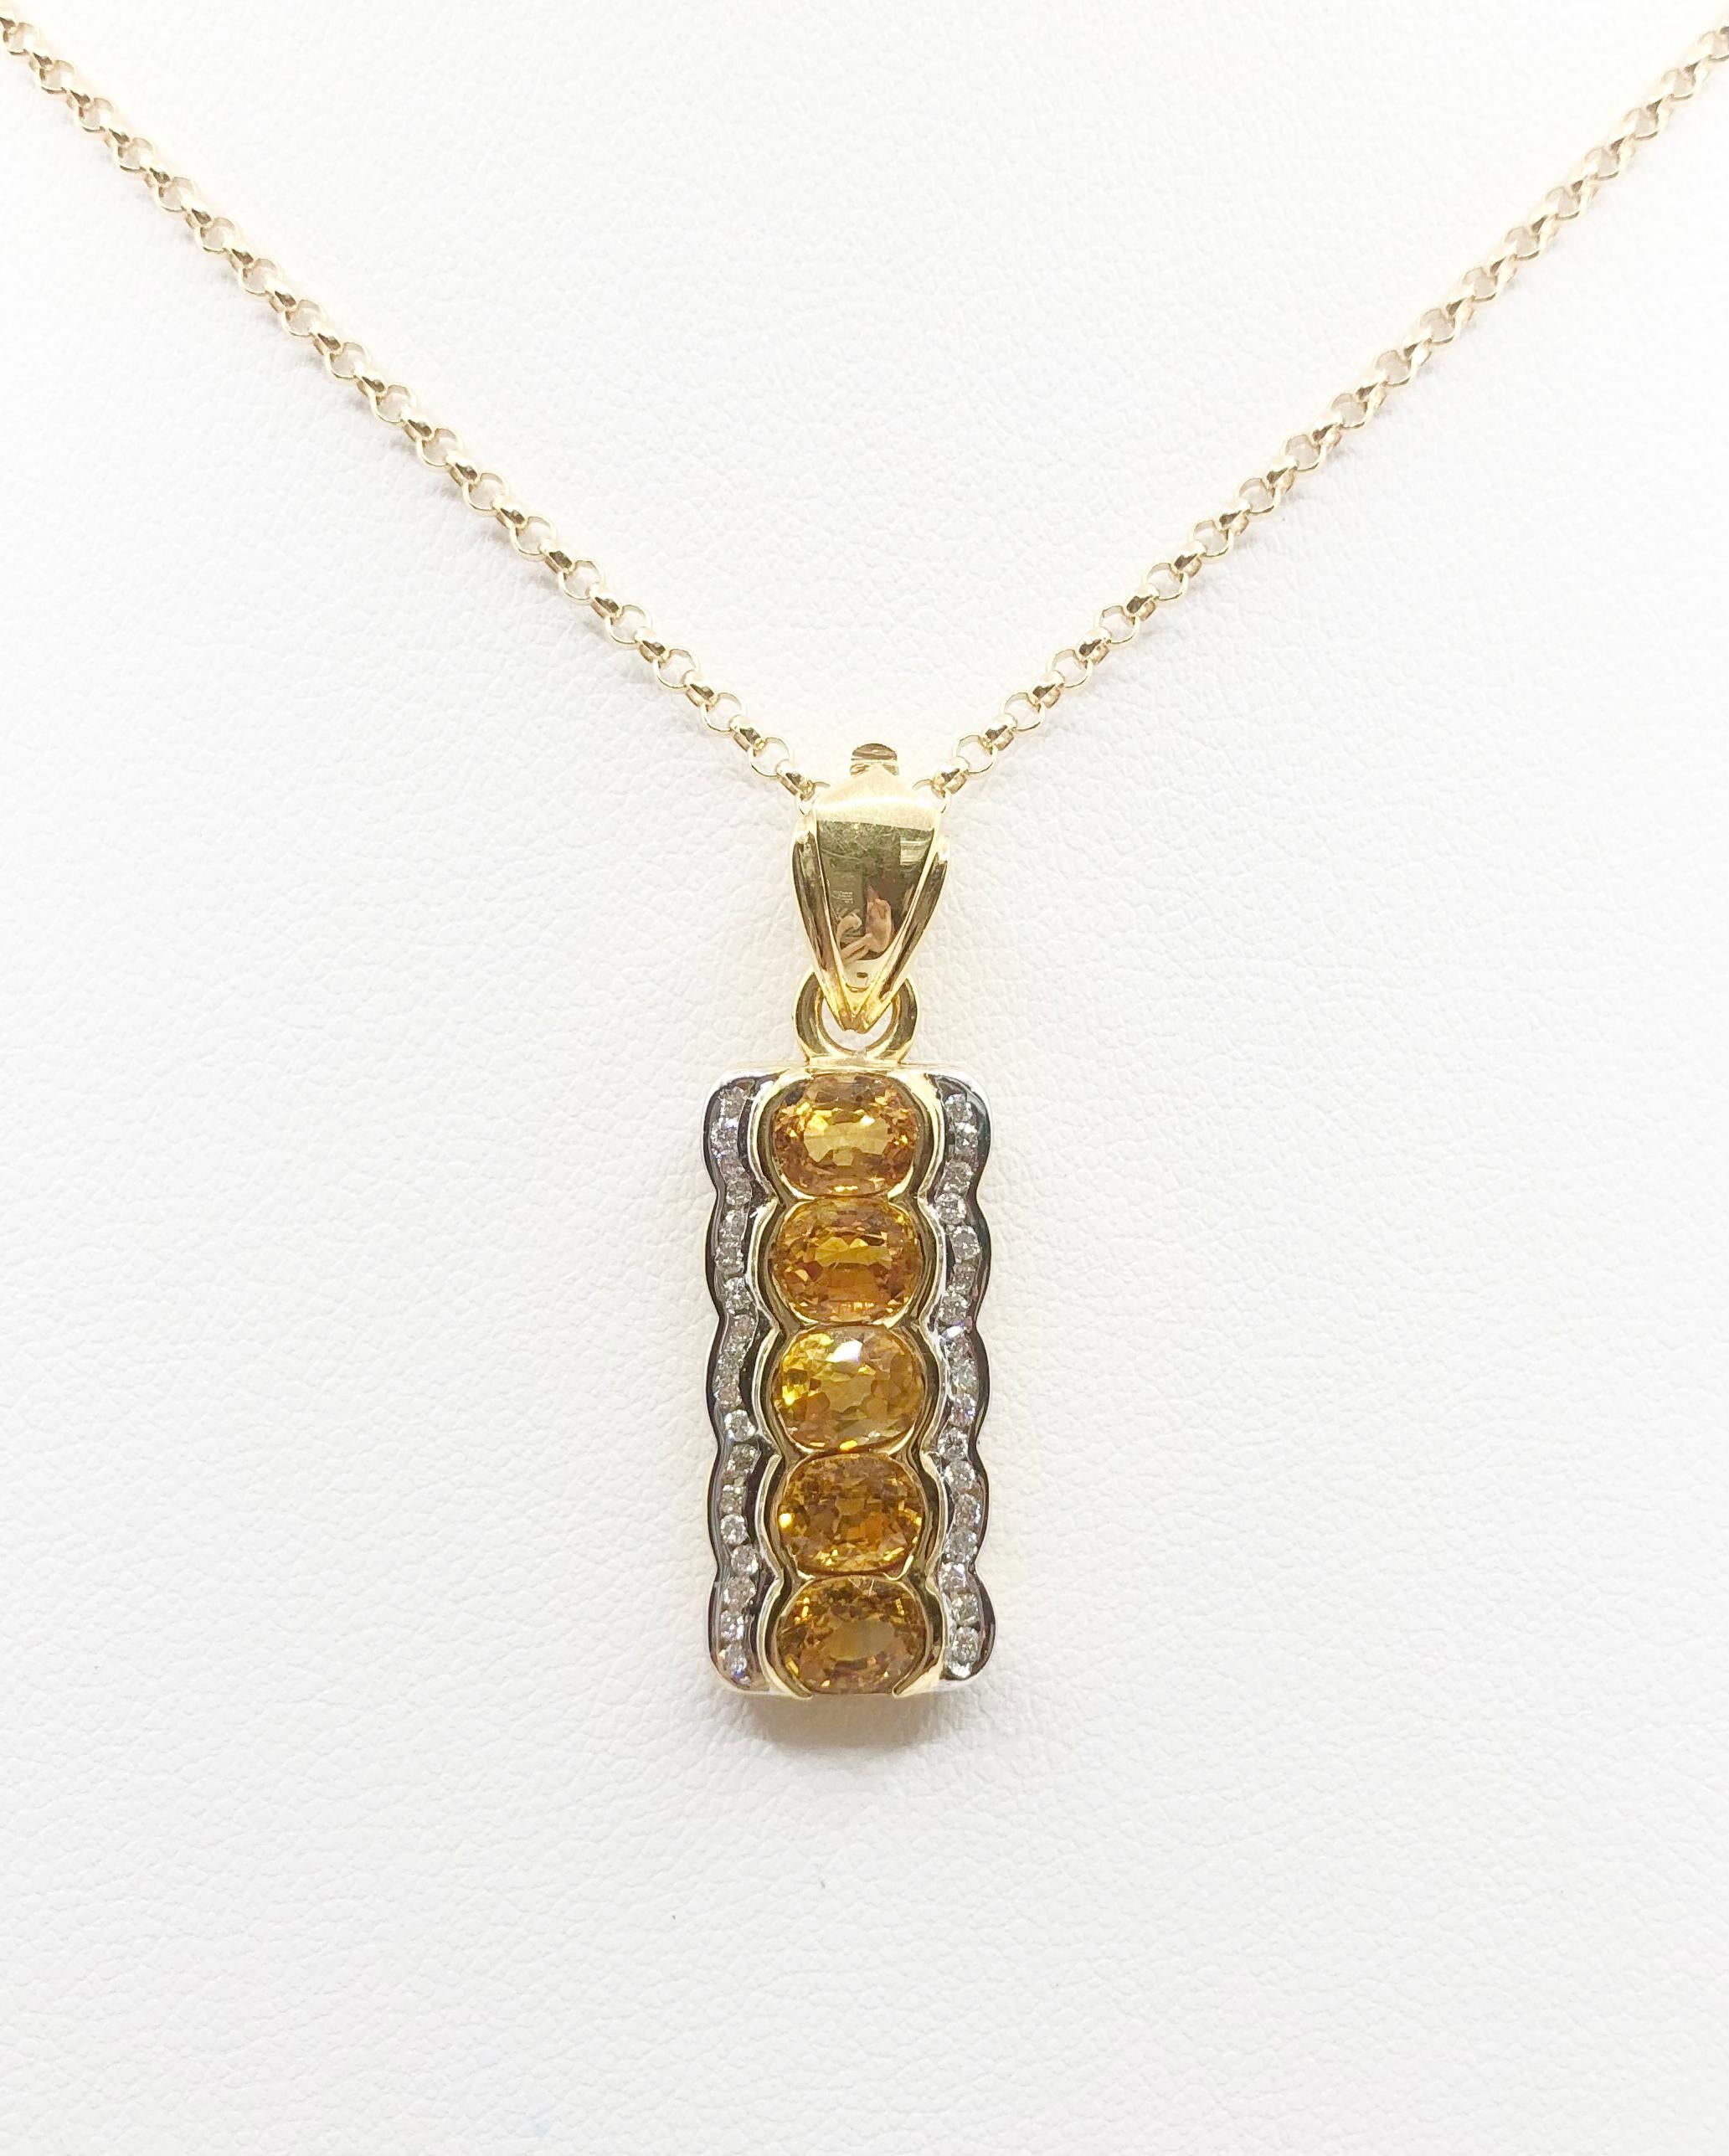 Yellow Sapphire 3.94 carats with Diamond 0.27 carat Pendant set in 18 Karat Gold Settings
(chain not included)

Width: 1.1 cm 
Length: 3.3 cm
Total Weight: 6.41 grams

